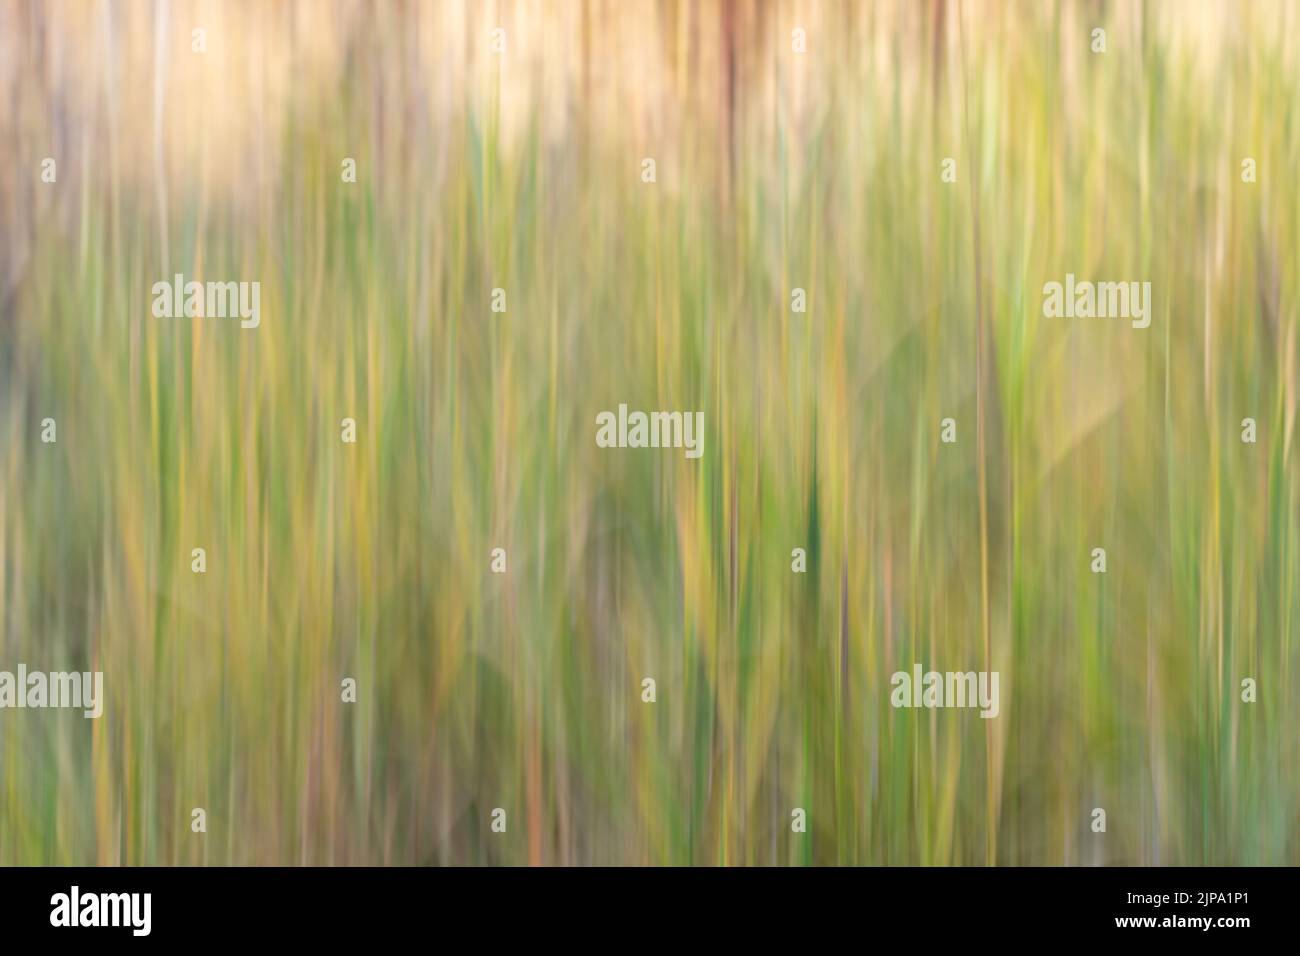 Yellow and Green Autumn Grass Abstract Blurred by Intentional Camera Movement Stock Photo